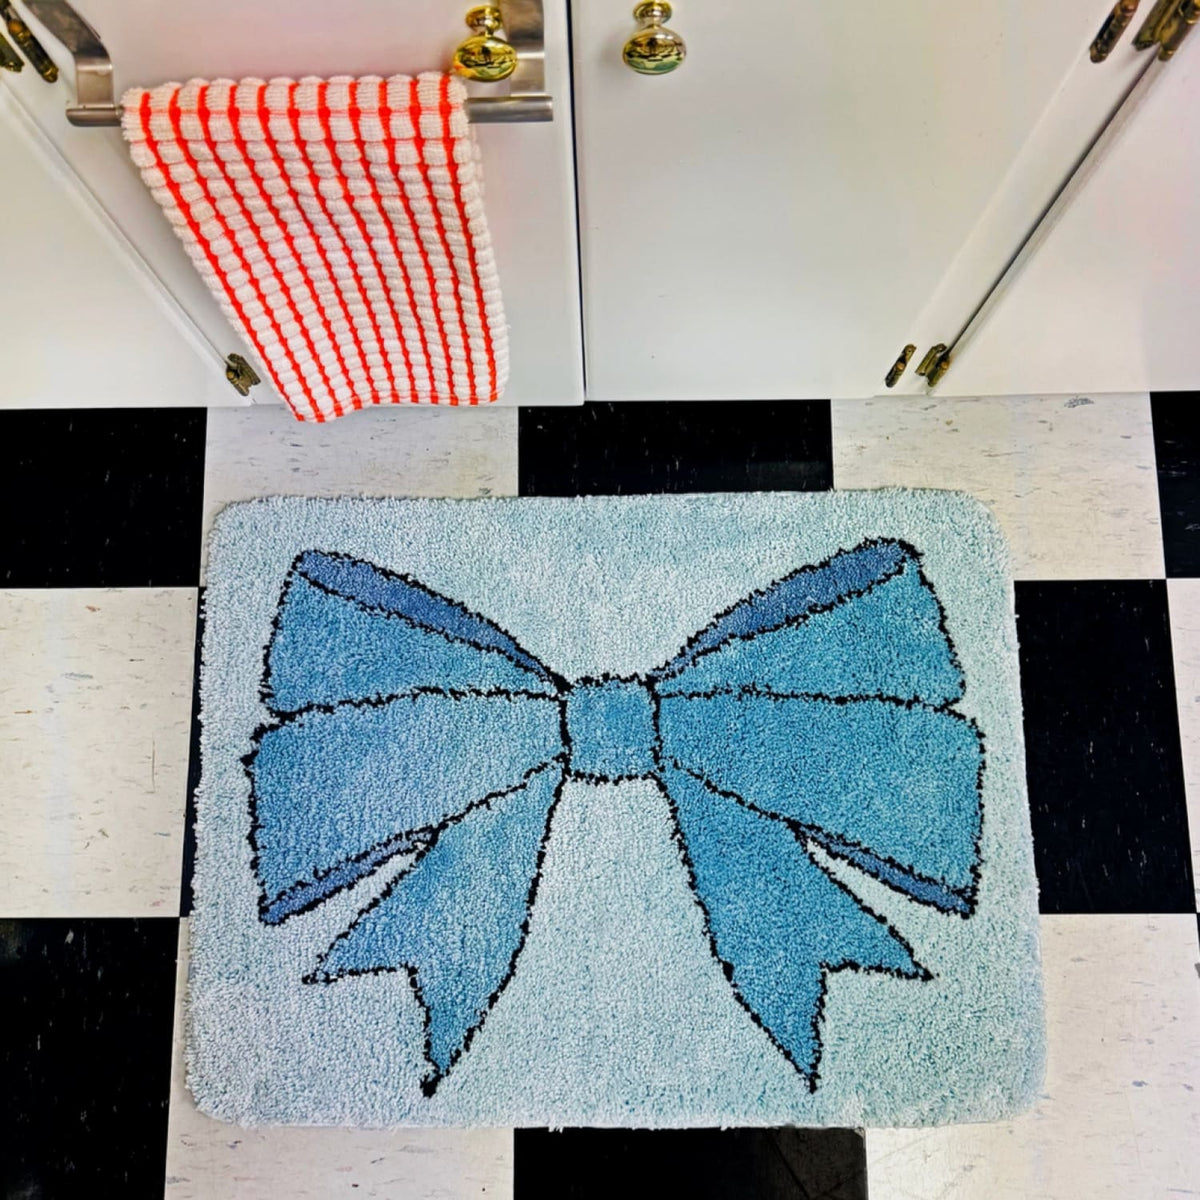 Ribbon Bow Rug Accent - Home Decor Kitsch Maximalist Novelty